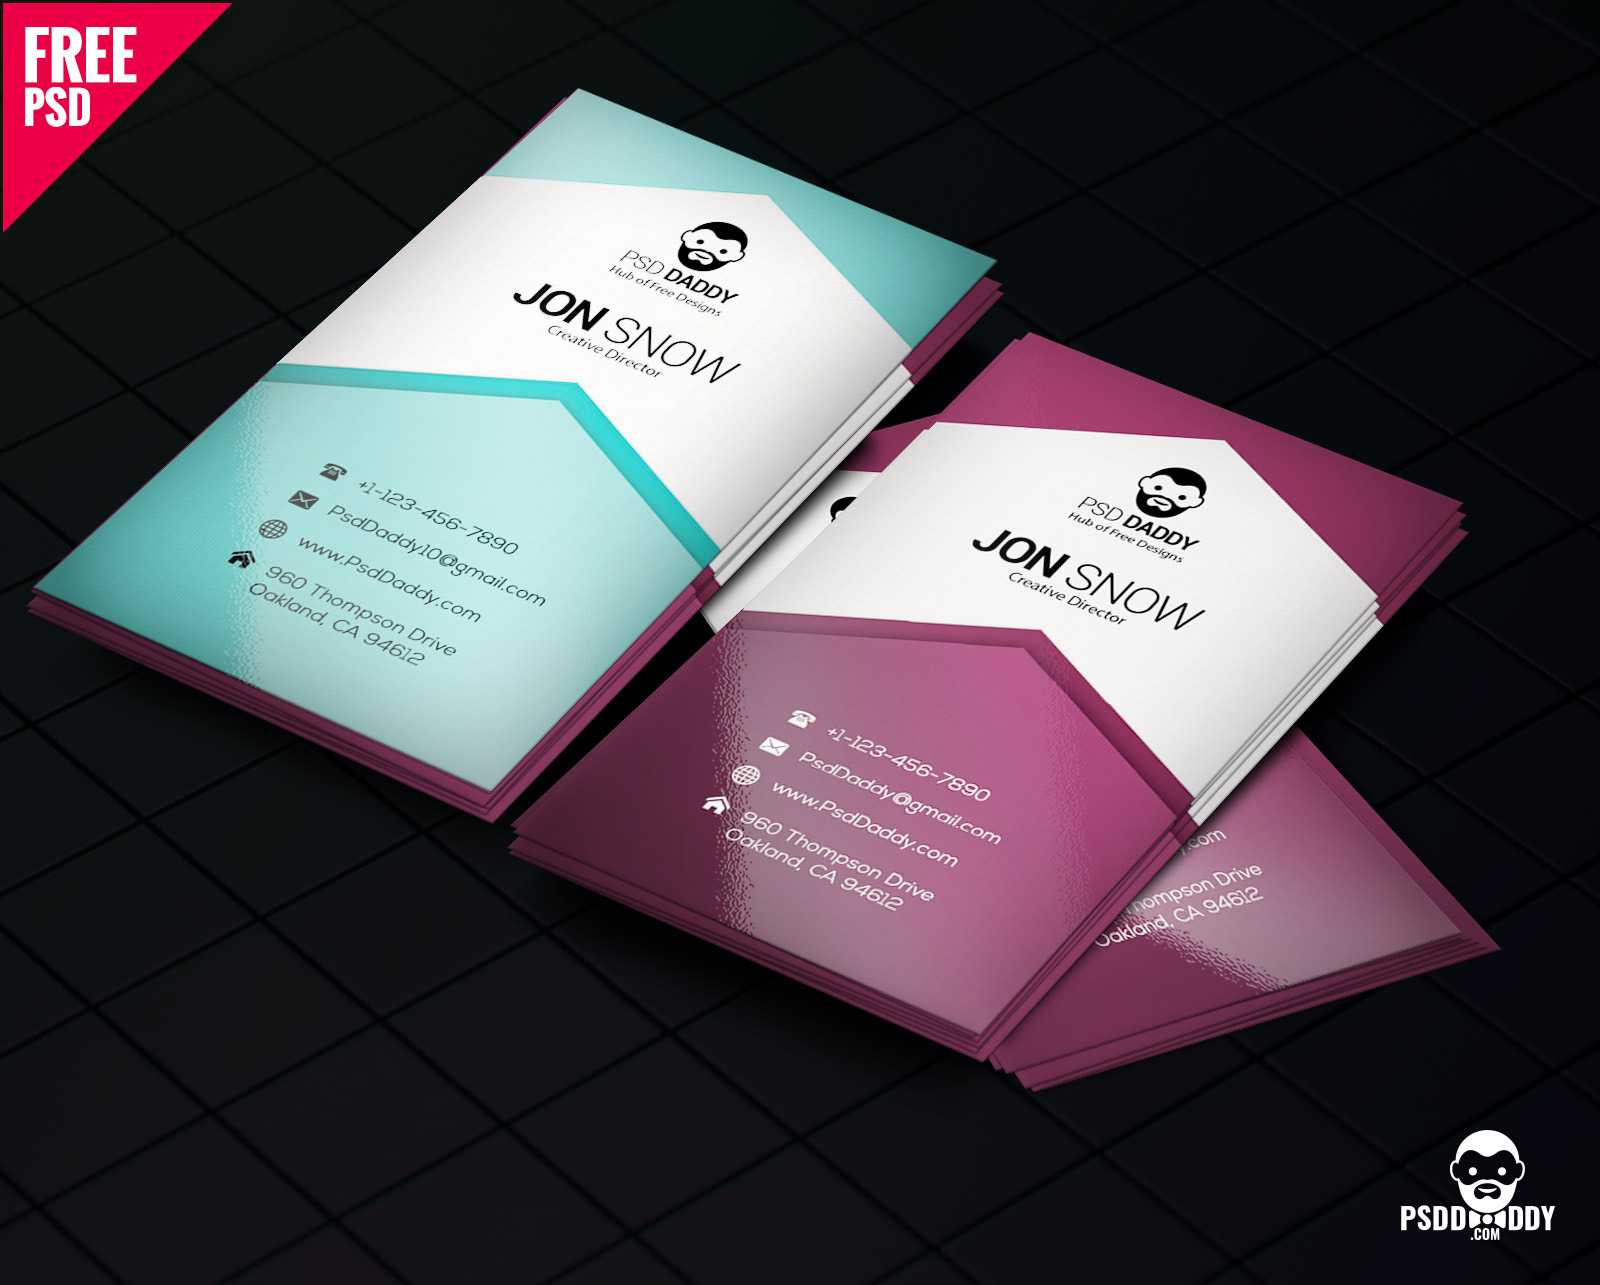 Download]Creative Business Card Psd Free | Psddaddy With Regard To Business Card Size Photoshop Template